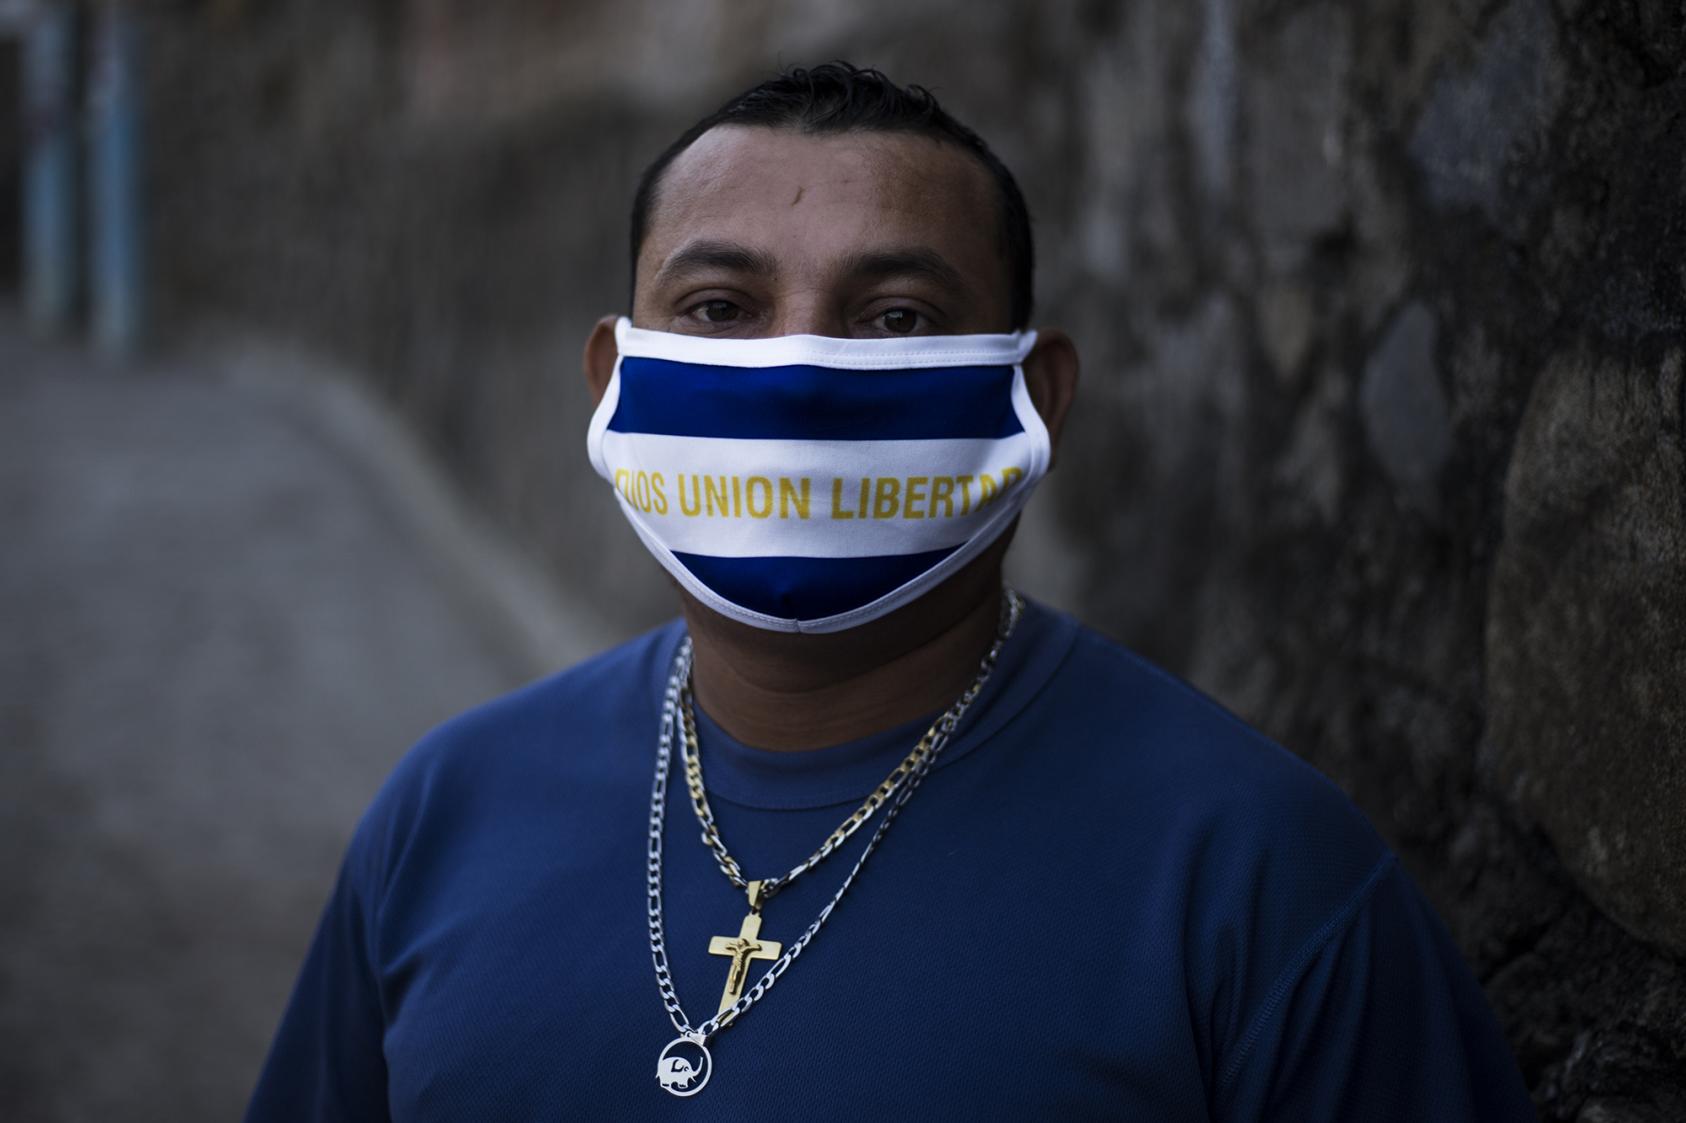 Germán Chávez, 32, has been out of work and without income for 40 days. A former beachside restaurant employee, he says he didn’t make the list for the government’s $300 USD pandemic relief checks.